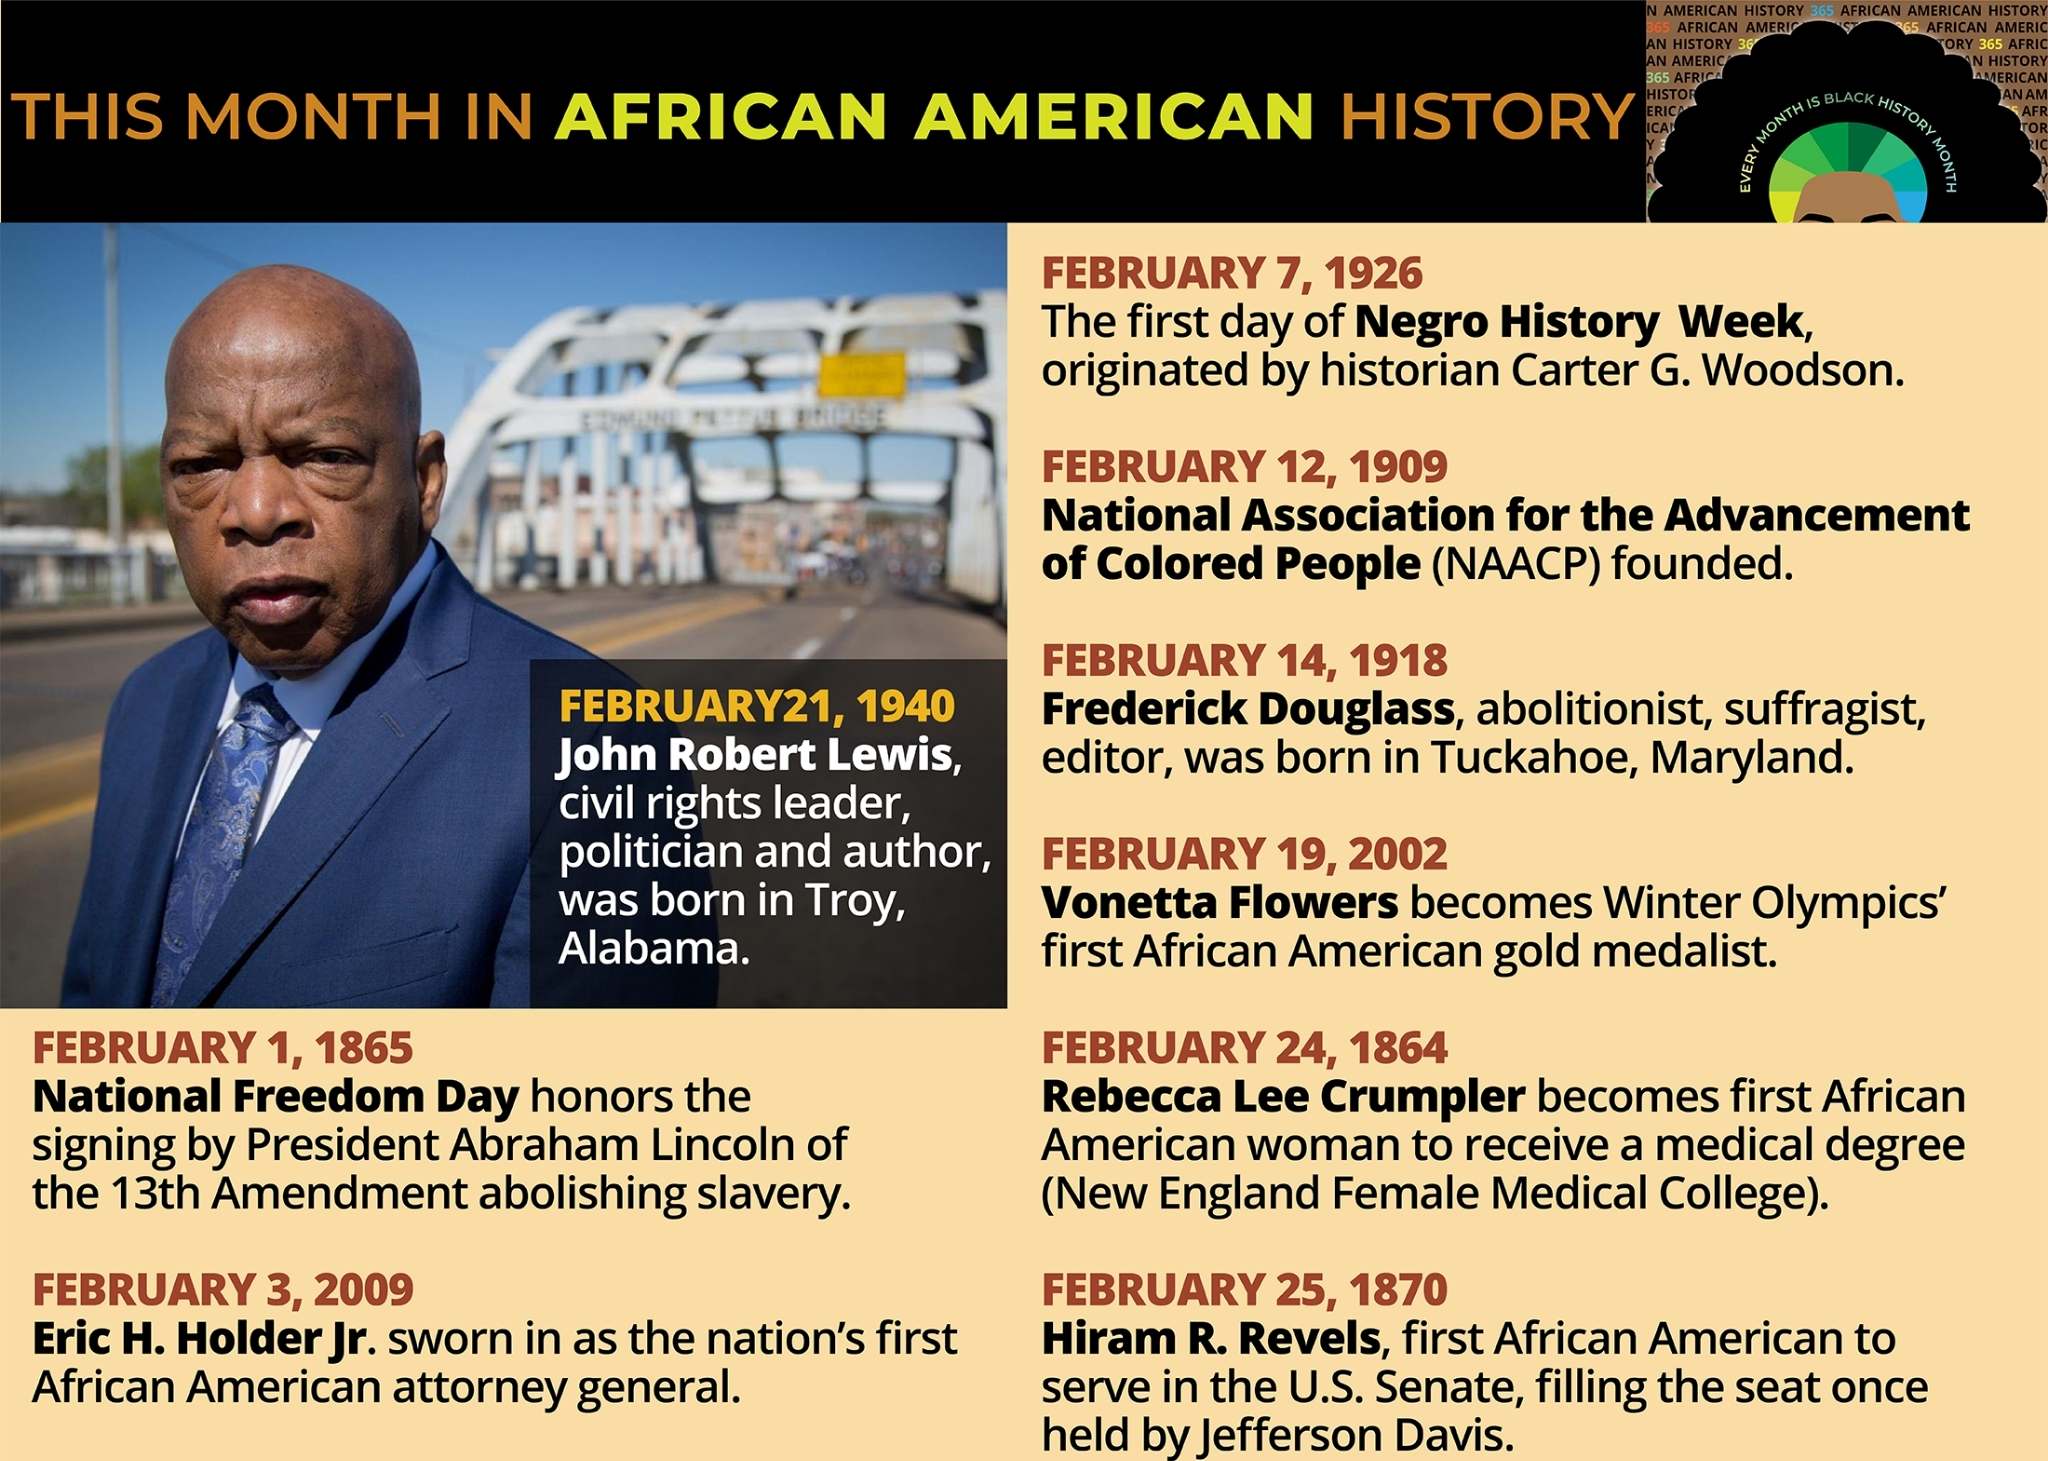 This Month in African American History